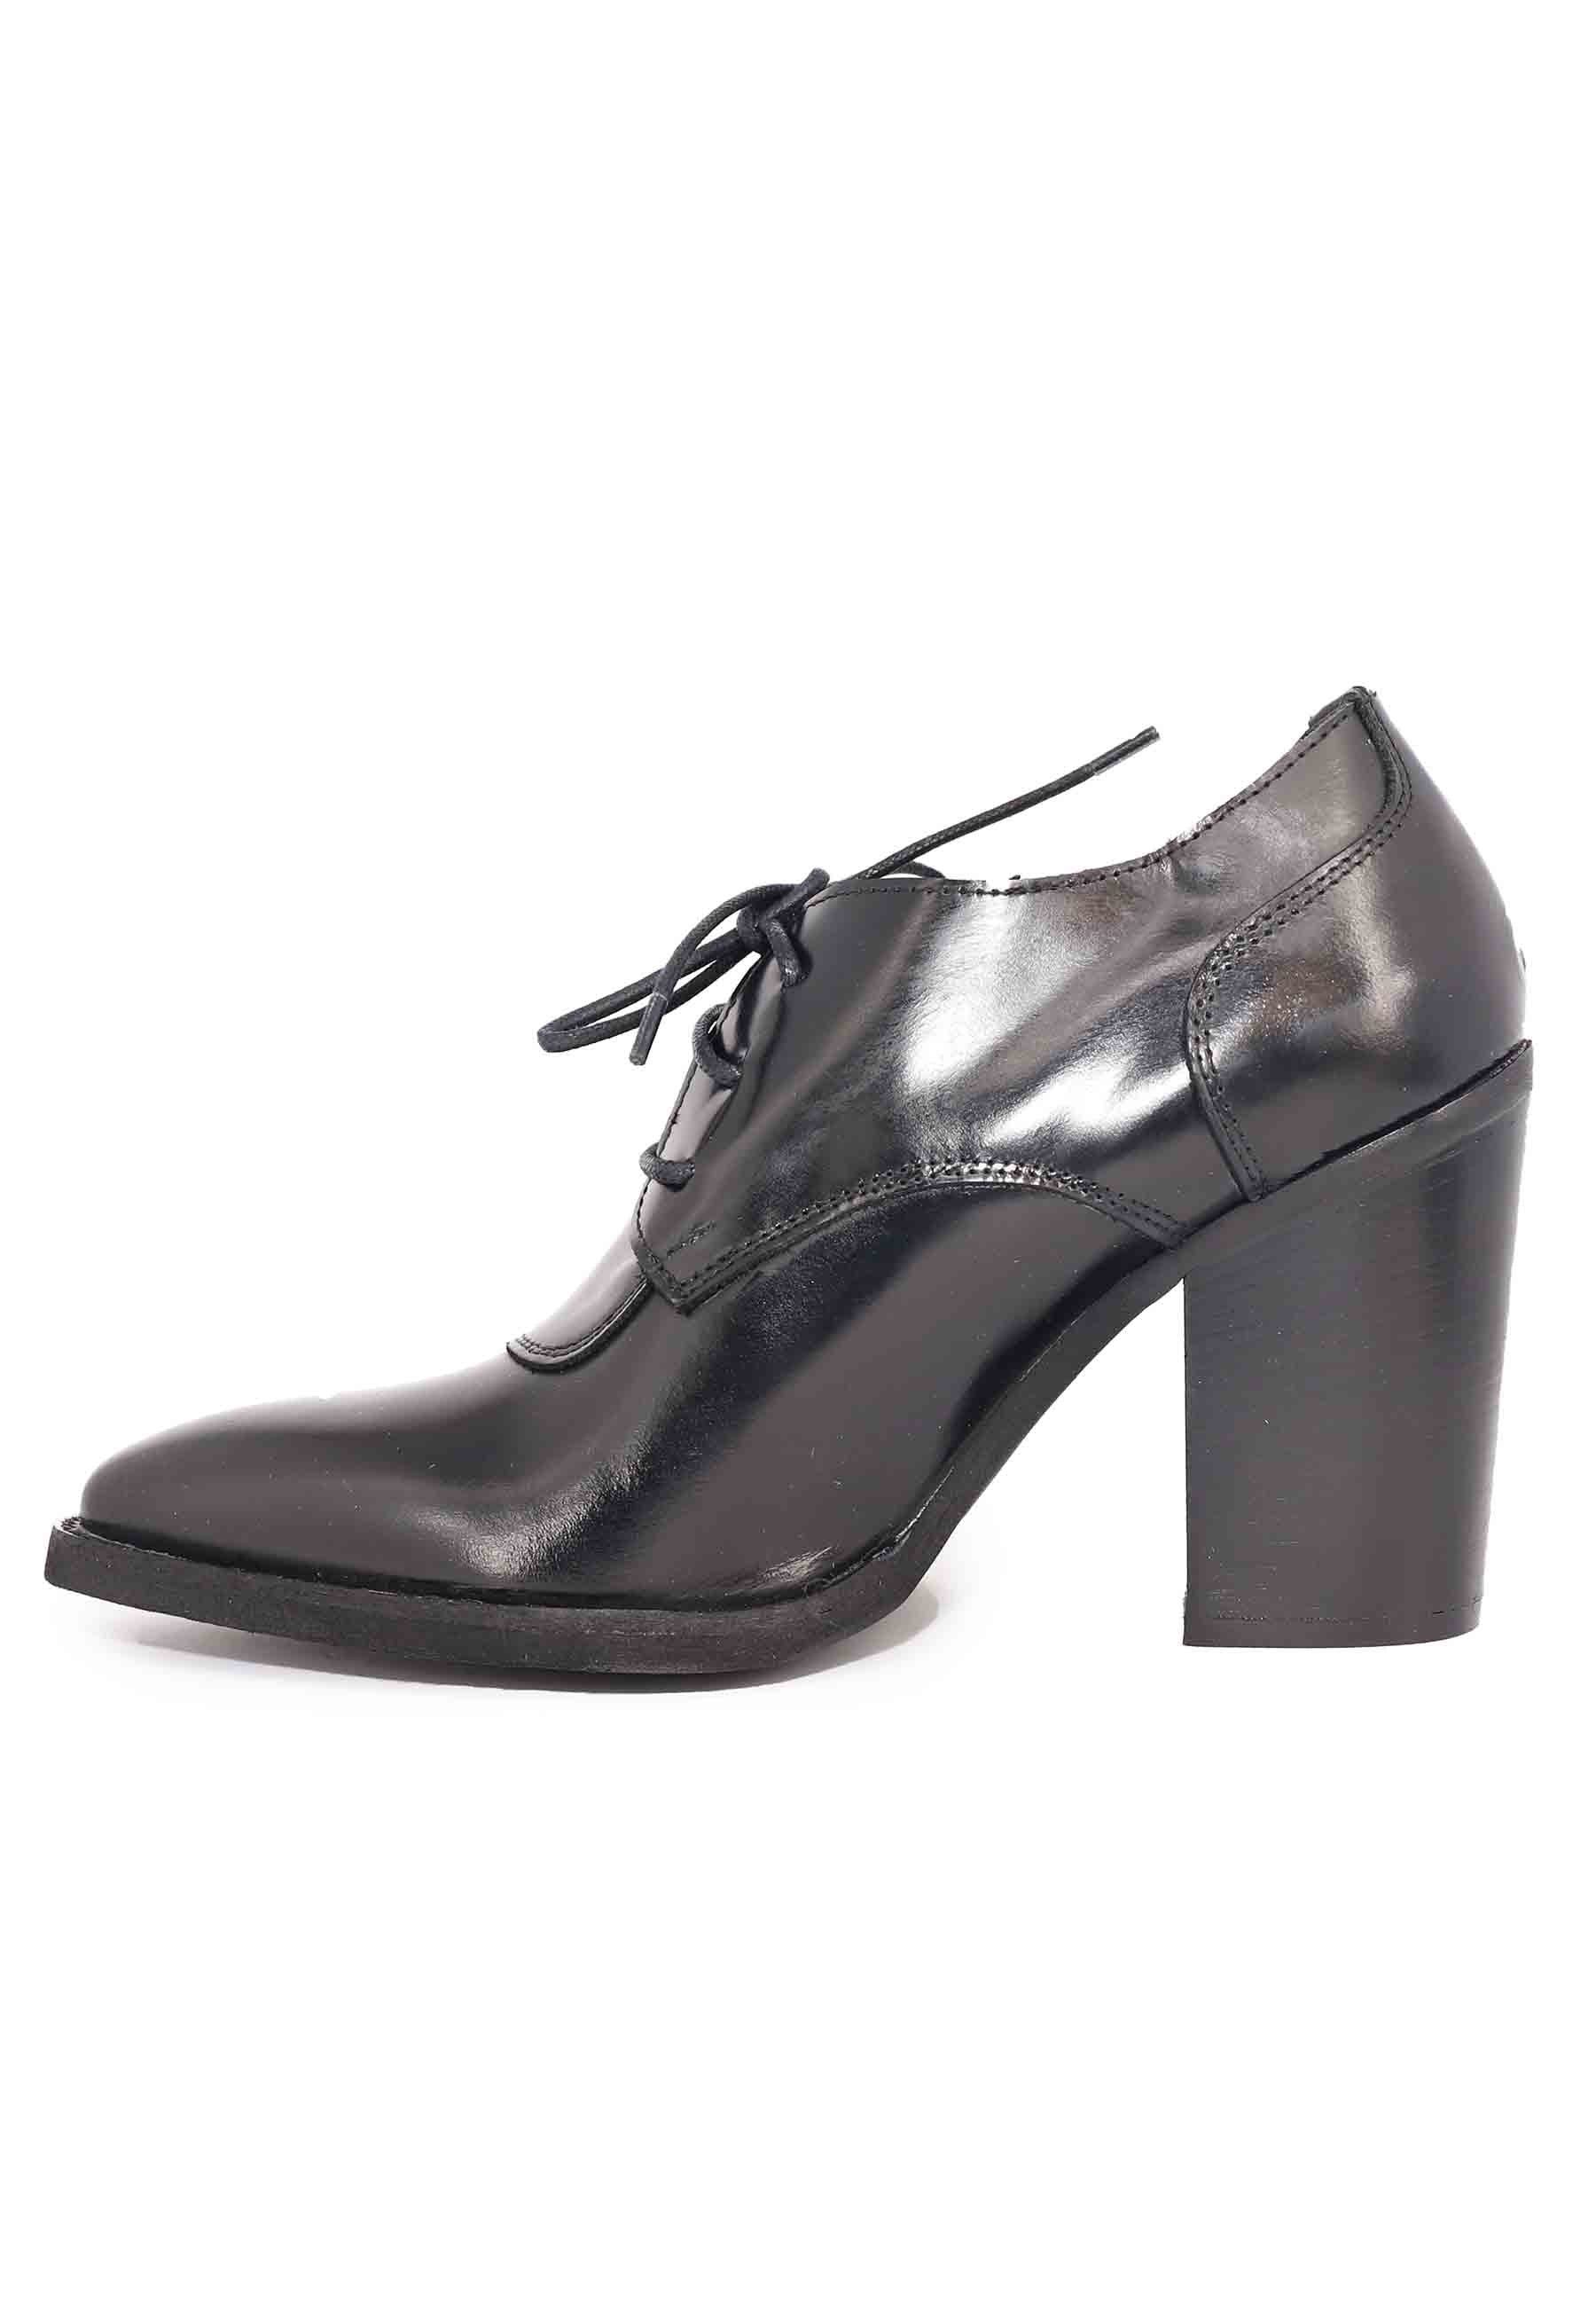 Women's black leather lace-ups with high heel and pointed toe